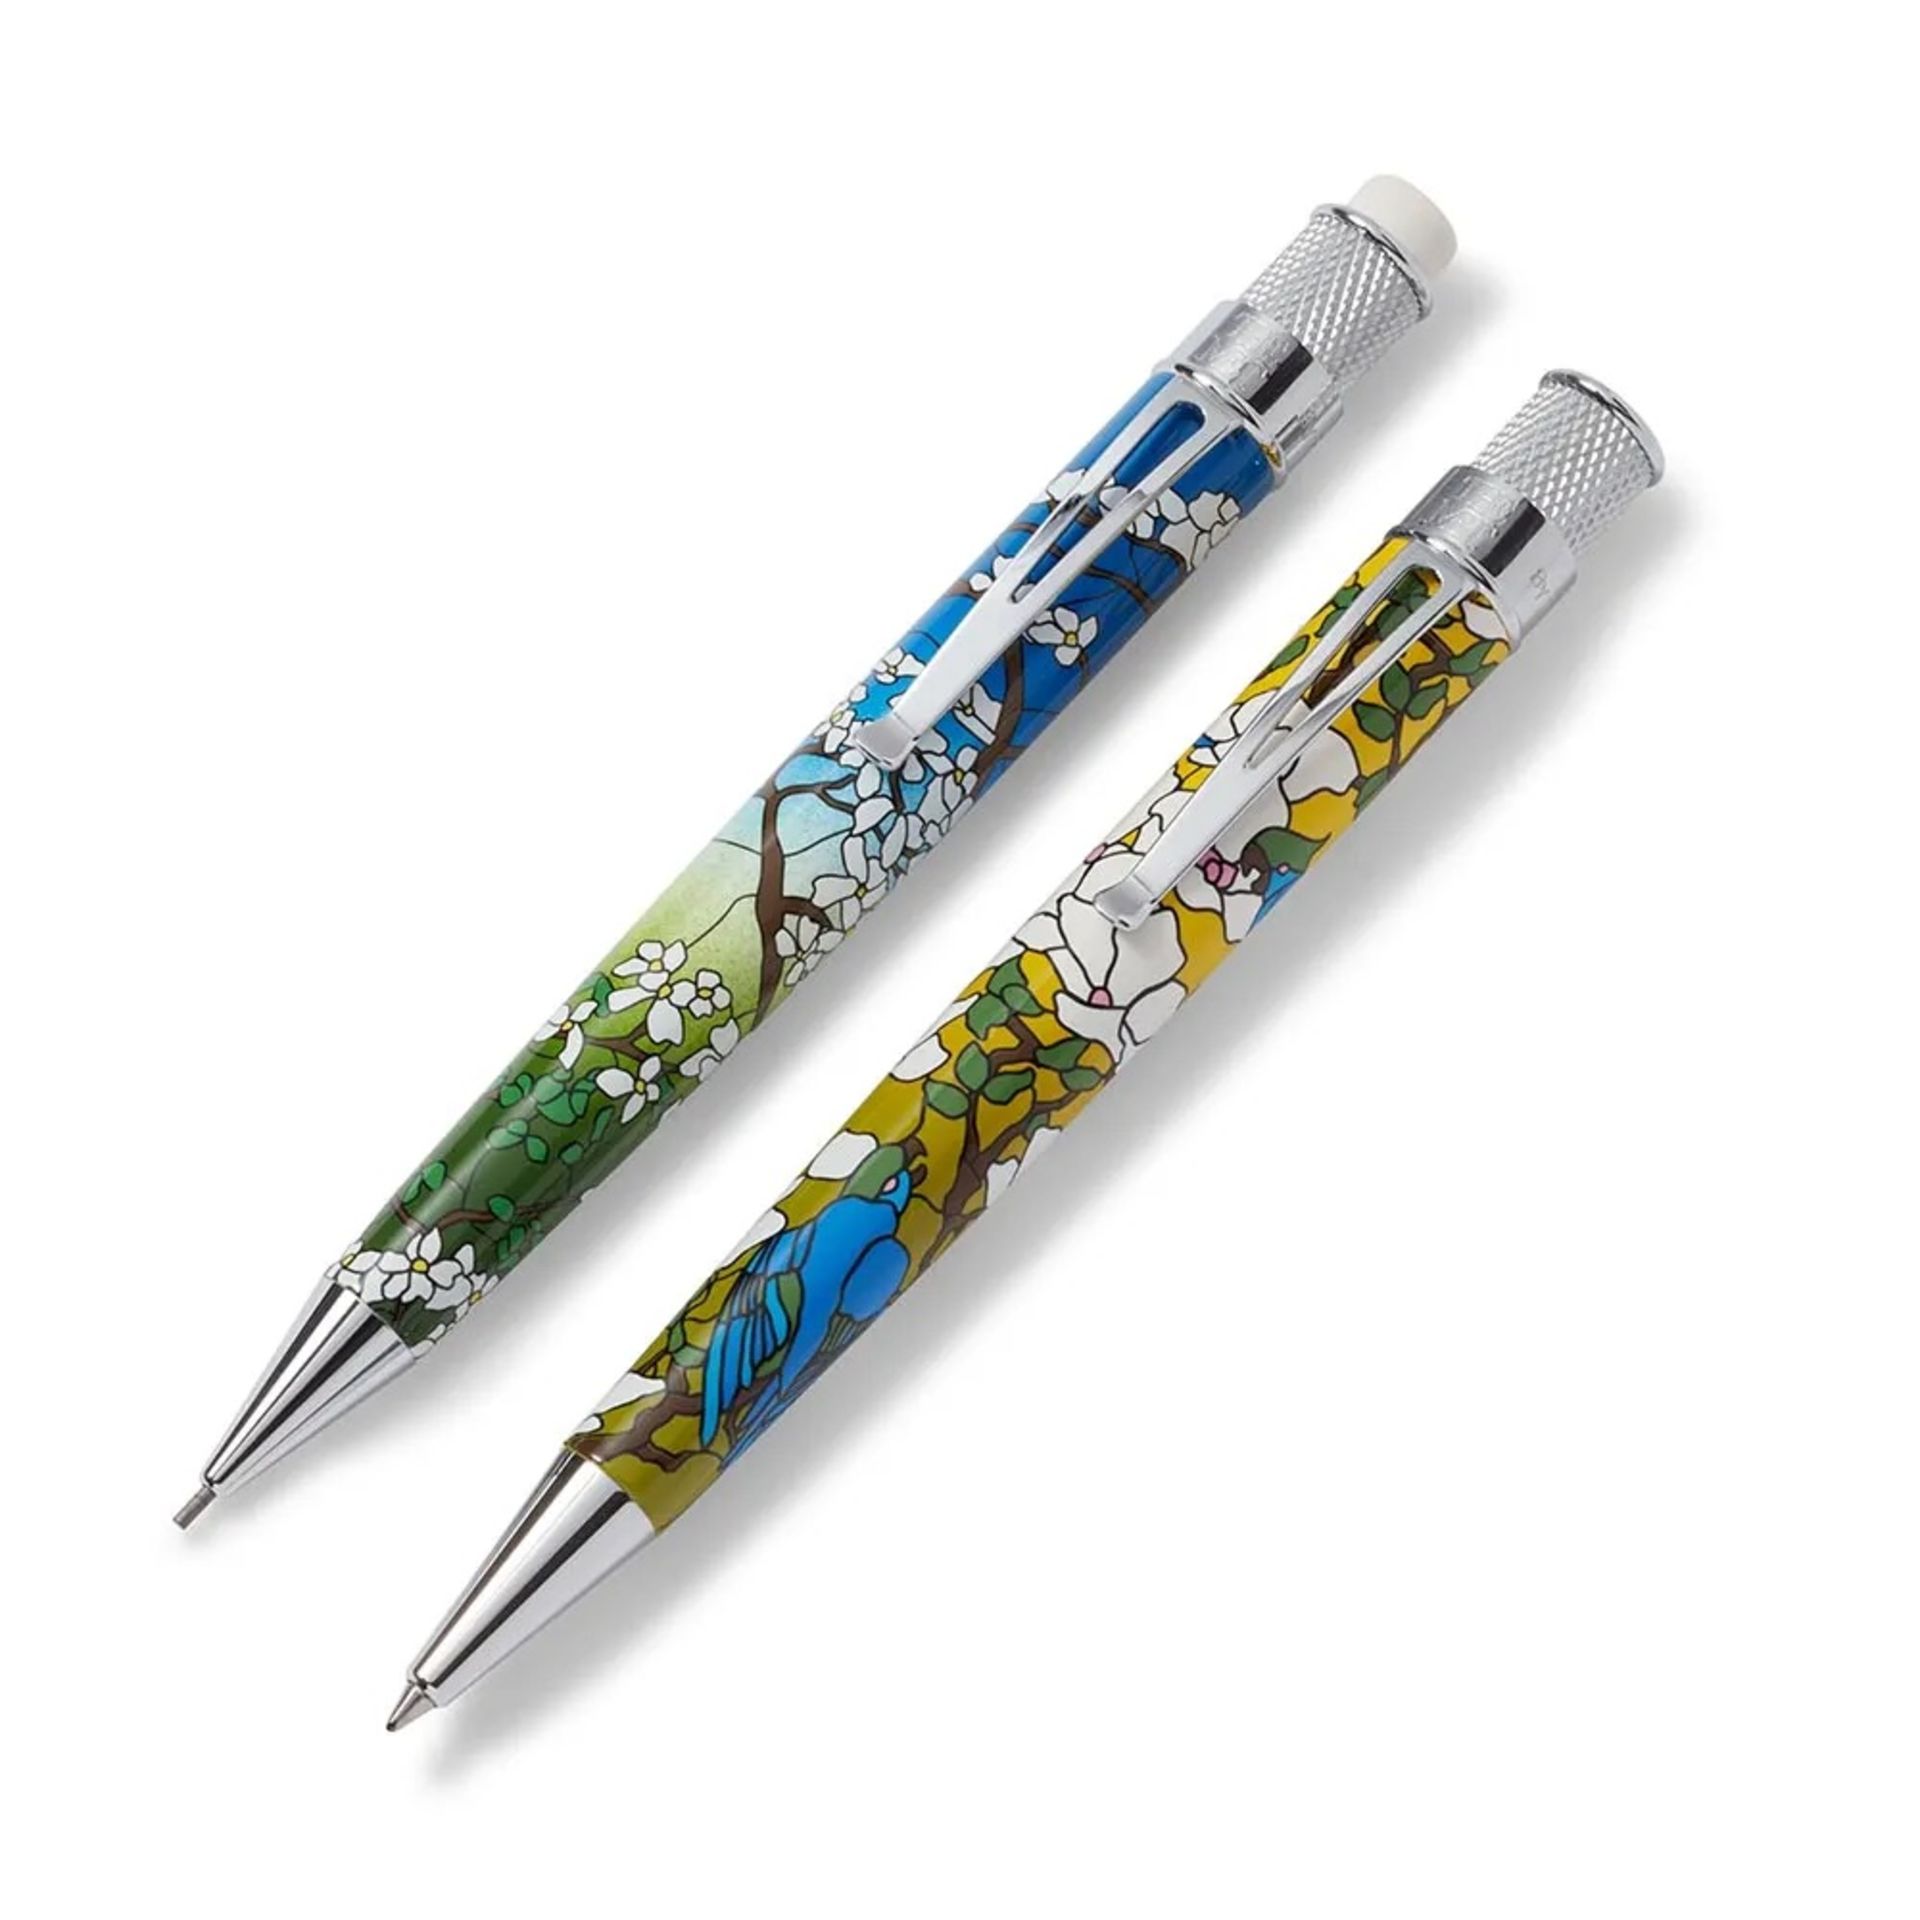 Louis Comfort Tiffany Pen and Pencil - Image 2 of 2